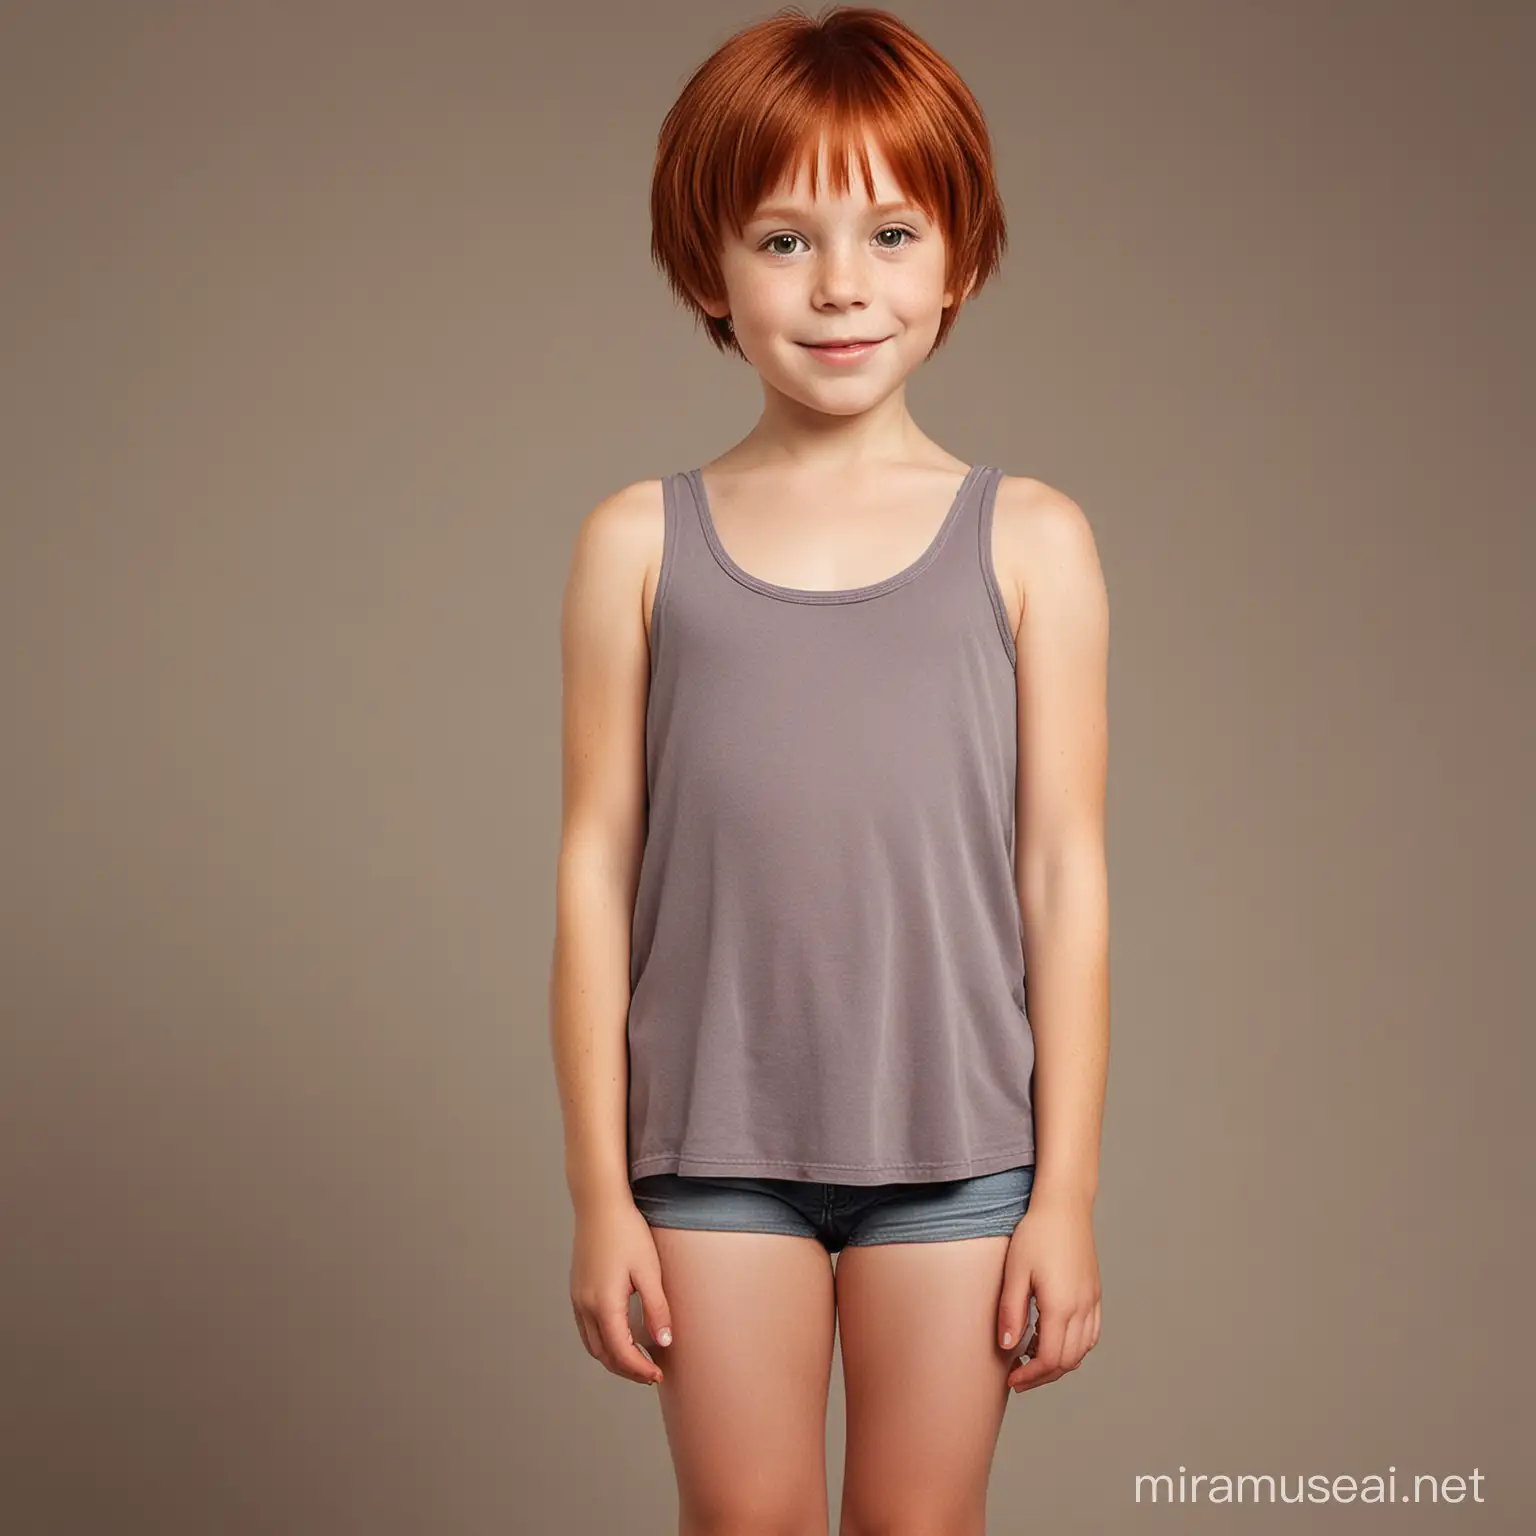 8 year old young girl, short straight red hair, thick body, full body,